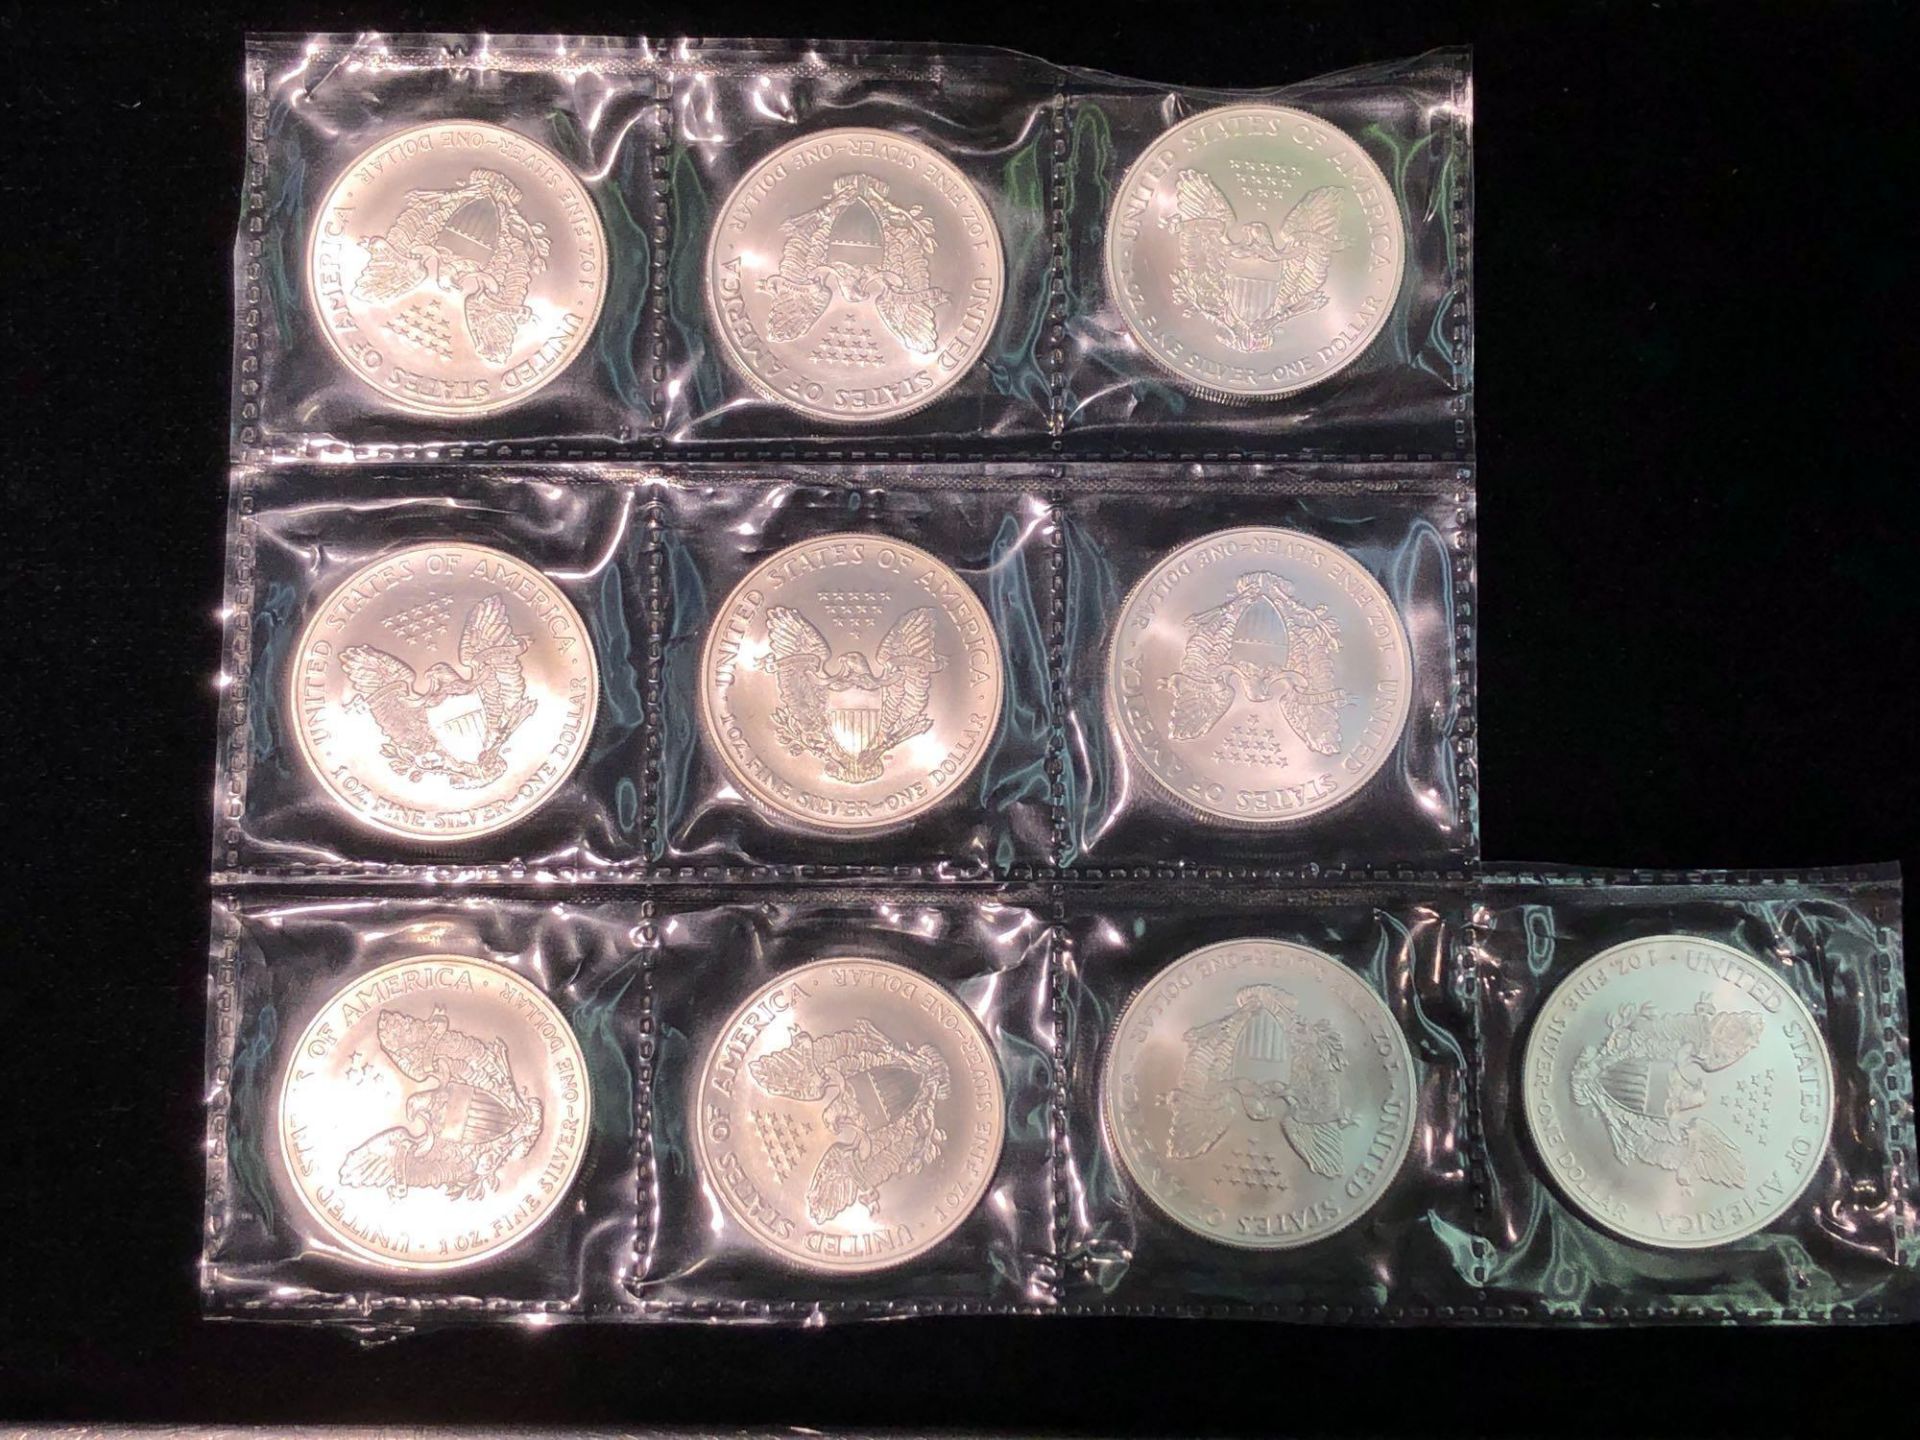 LOT OF 9 2004 AMERICAN EAGLE 1 OZT SILVER COINS SEALED IN PLASTIC - Image 3 of 8